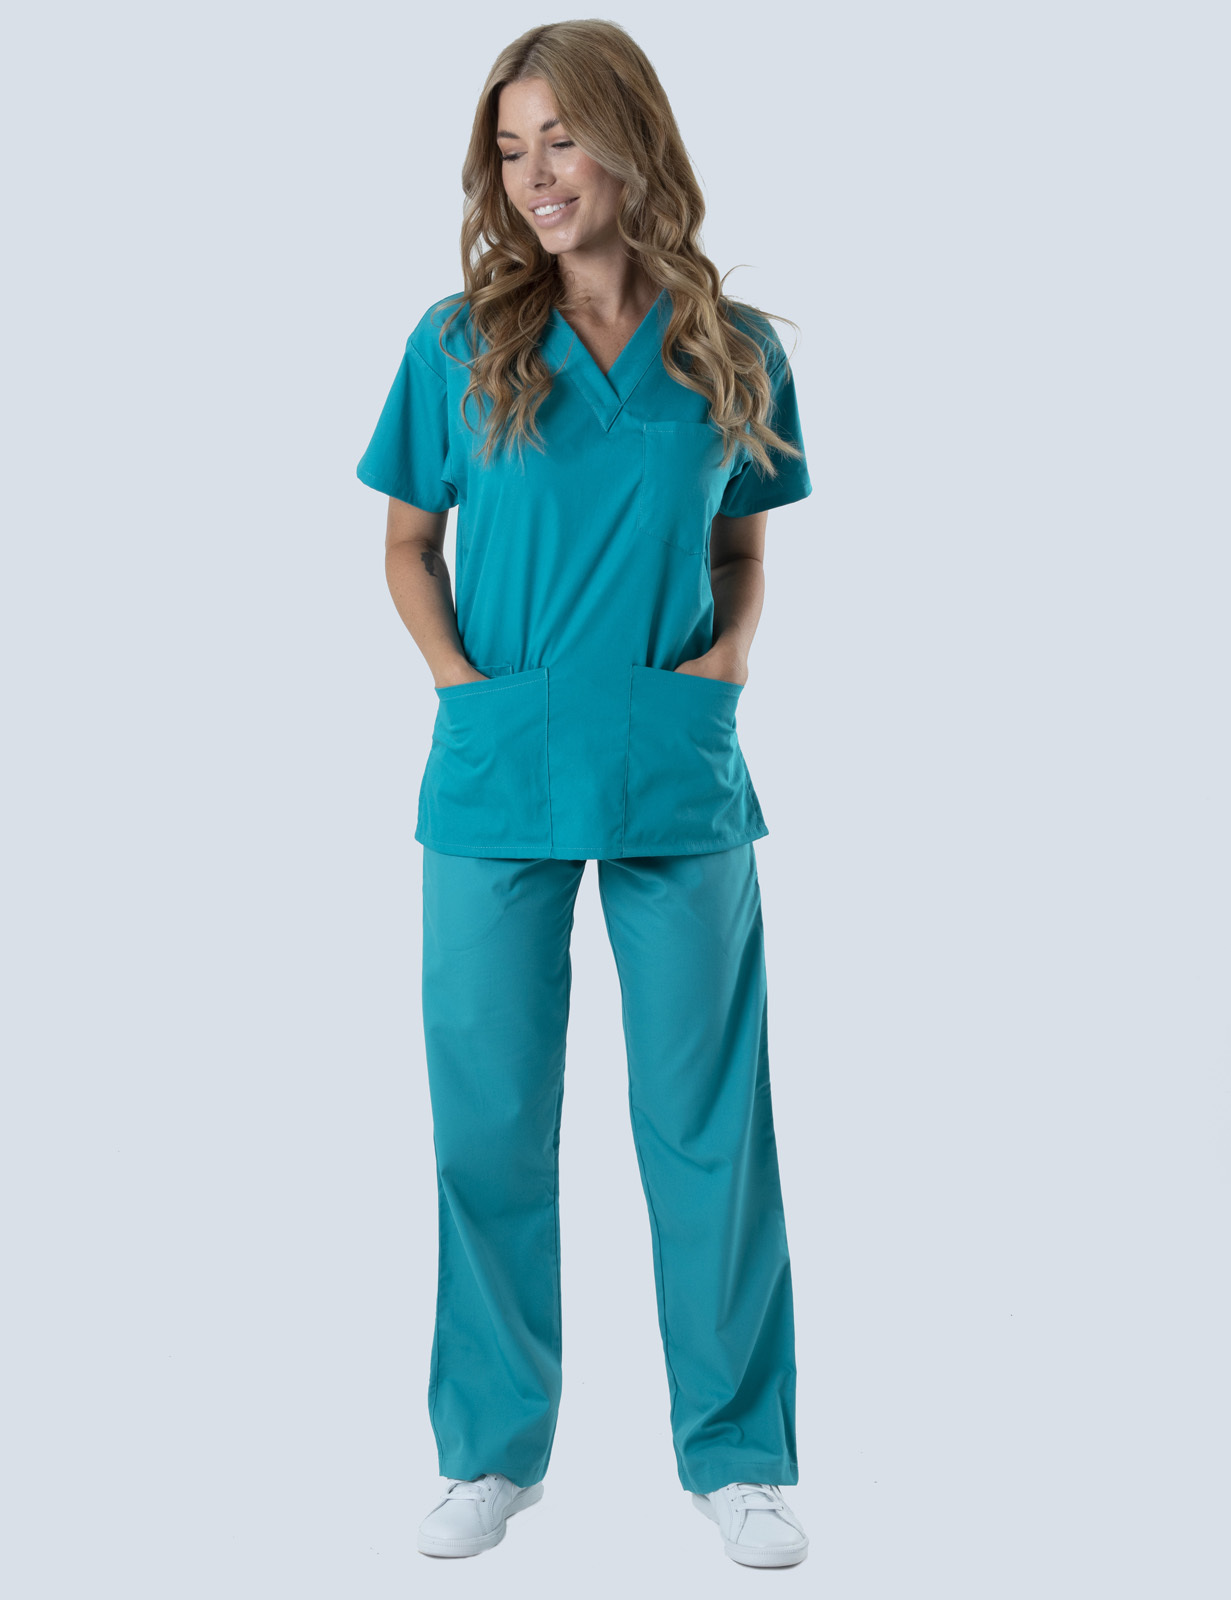 Redland Hospital - Emergency Department (4 Pocket Scrub Top and Cargo Pants in Teal incl Logos)